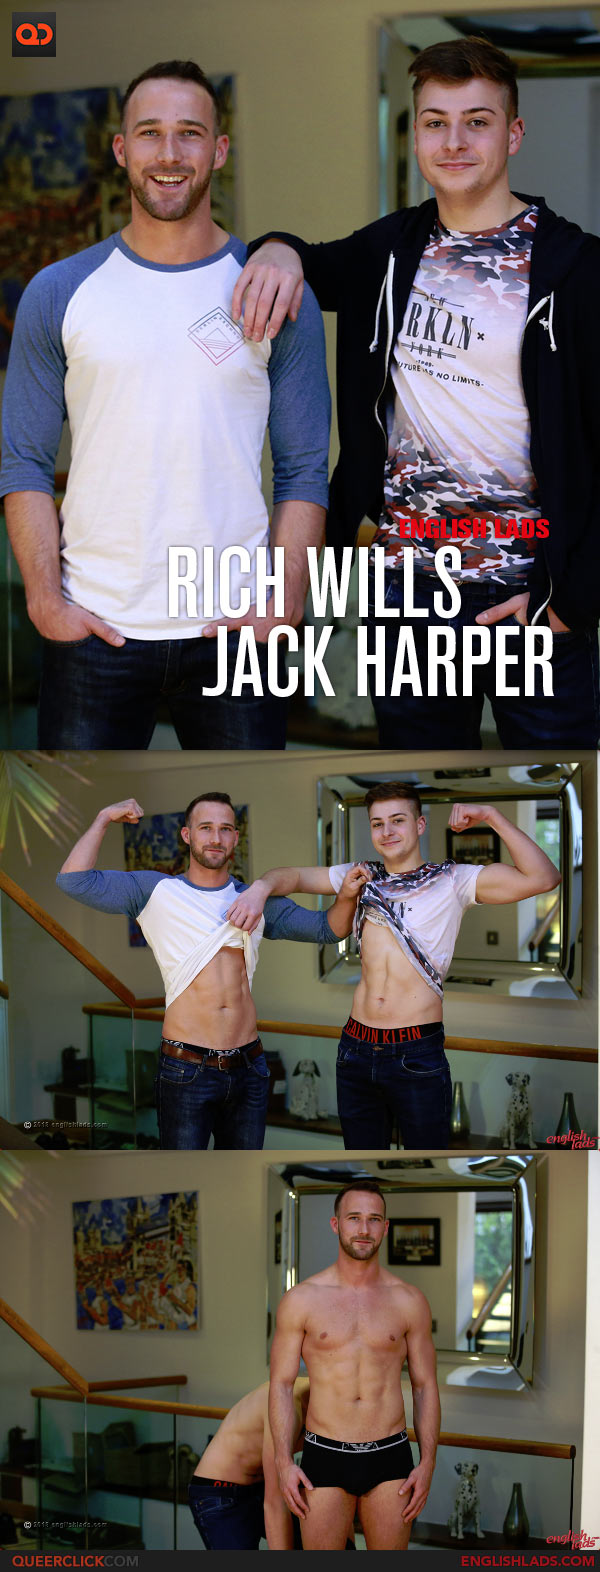 English Lads: Rich Wills and Jack Harper